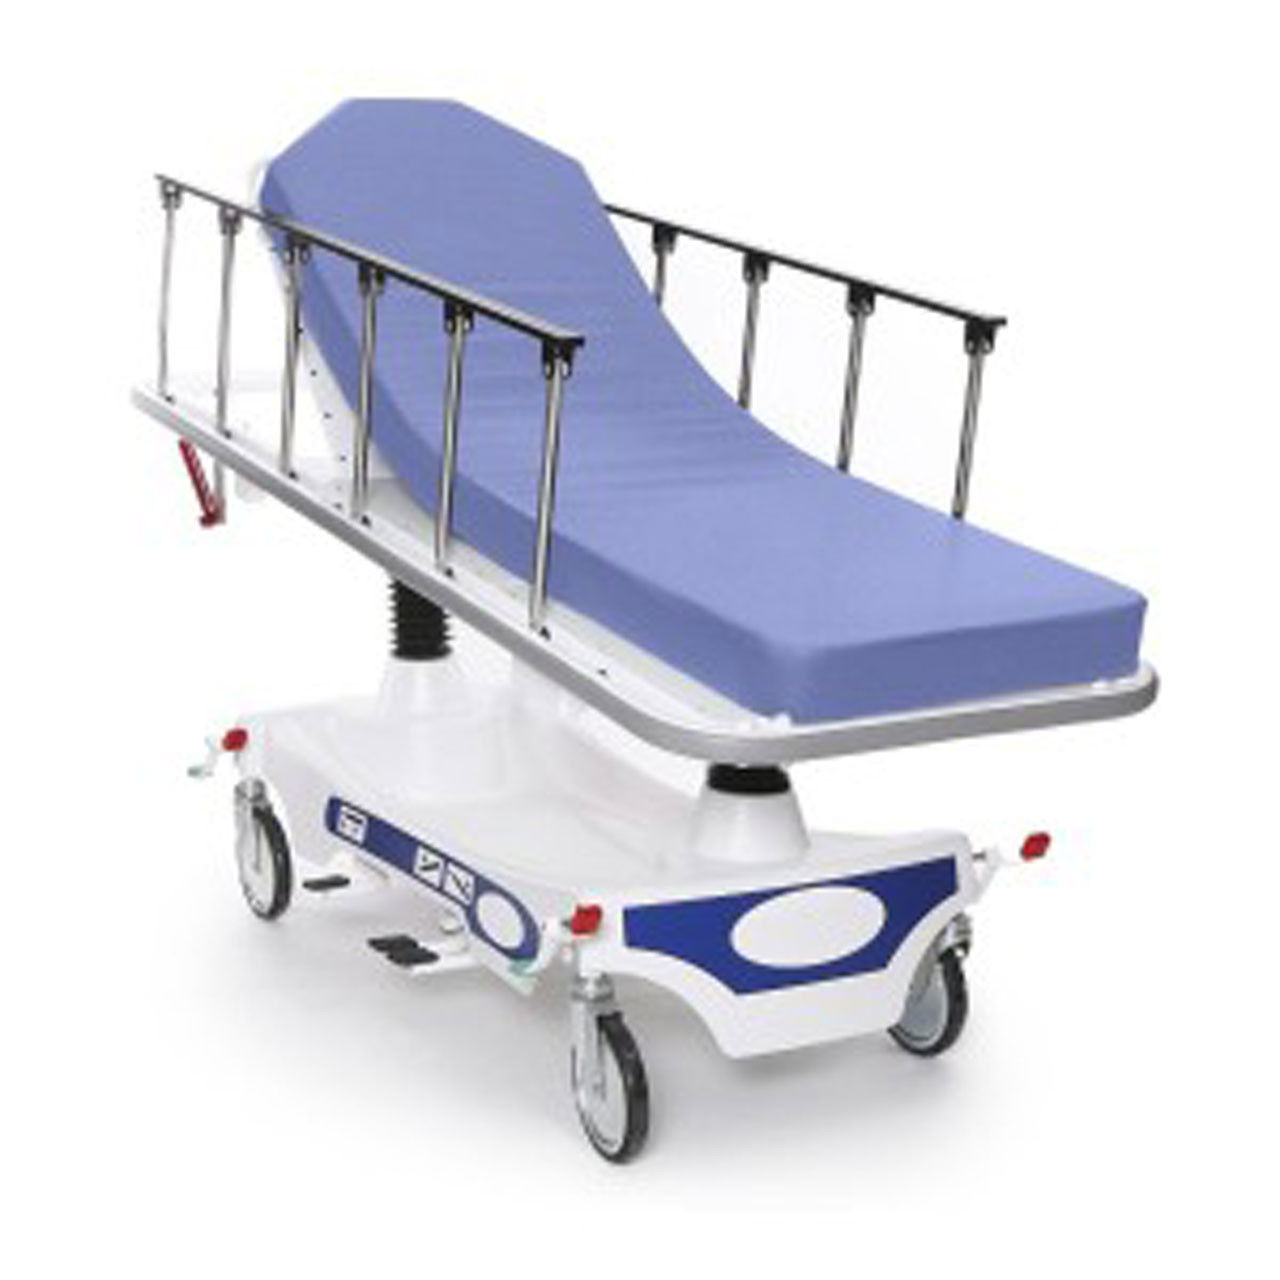 Do stretcher sheets come in various sizes and weights?